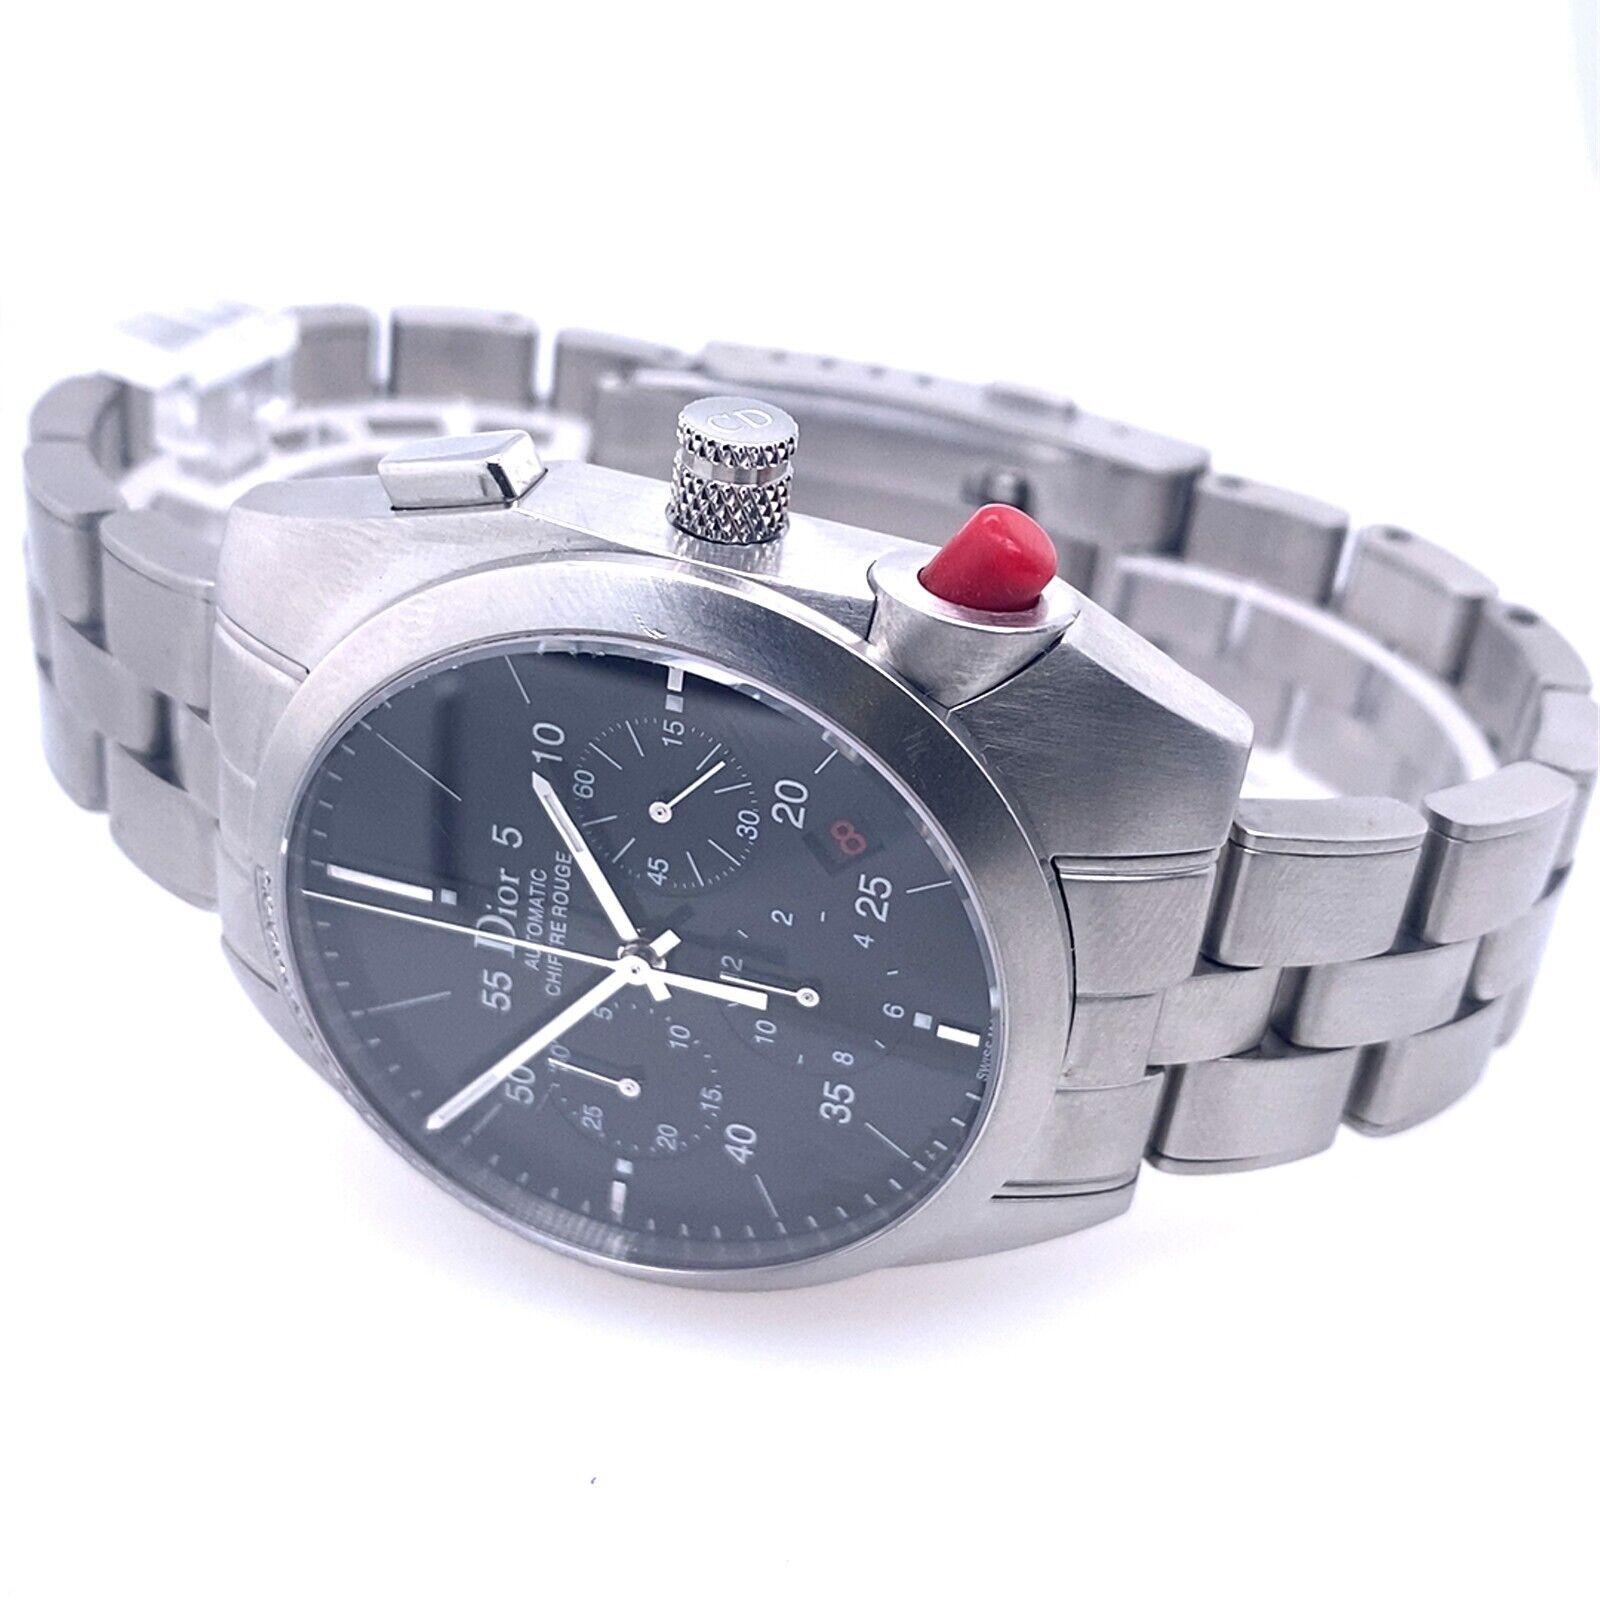 Christian Dior Home Paris Chiffre Rouge 38mm Fully Serviced and in Full Working Condition with Diamonds set bezel 0.20ct F colour/ VS Purity.

Additional Information: 
Total Weight: 150g
Serial Number: DIOR 084612
Strap Width: 50mm-16mm
Lug Width: